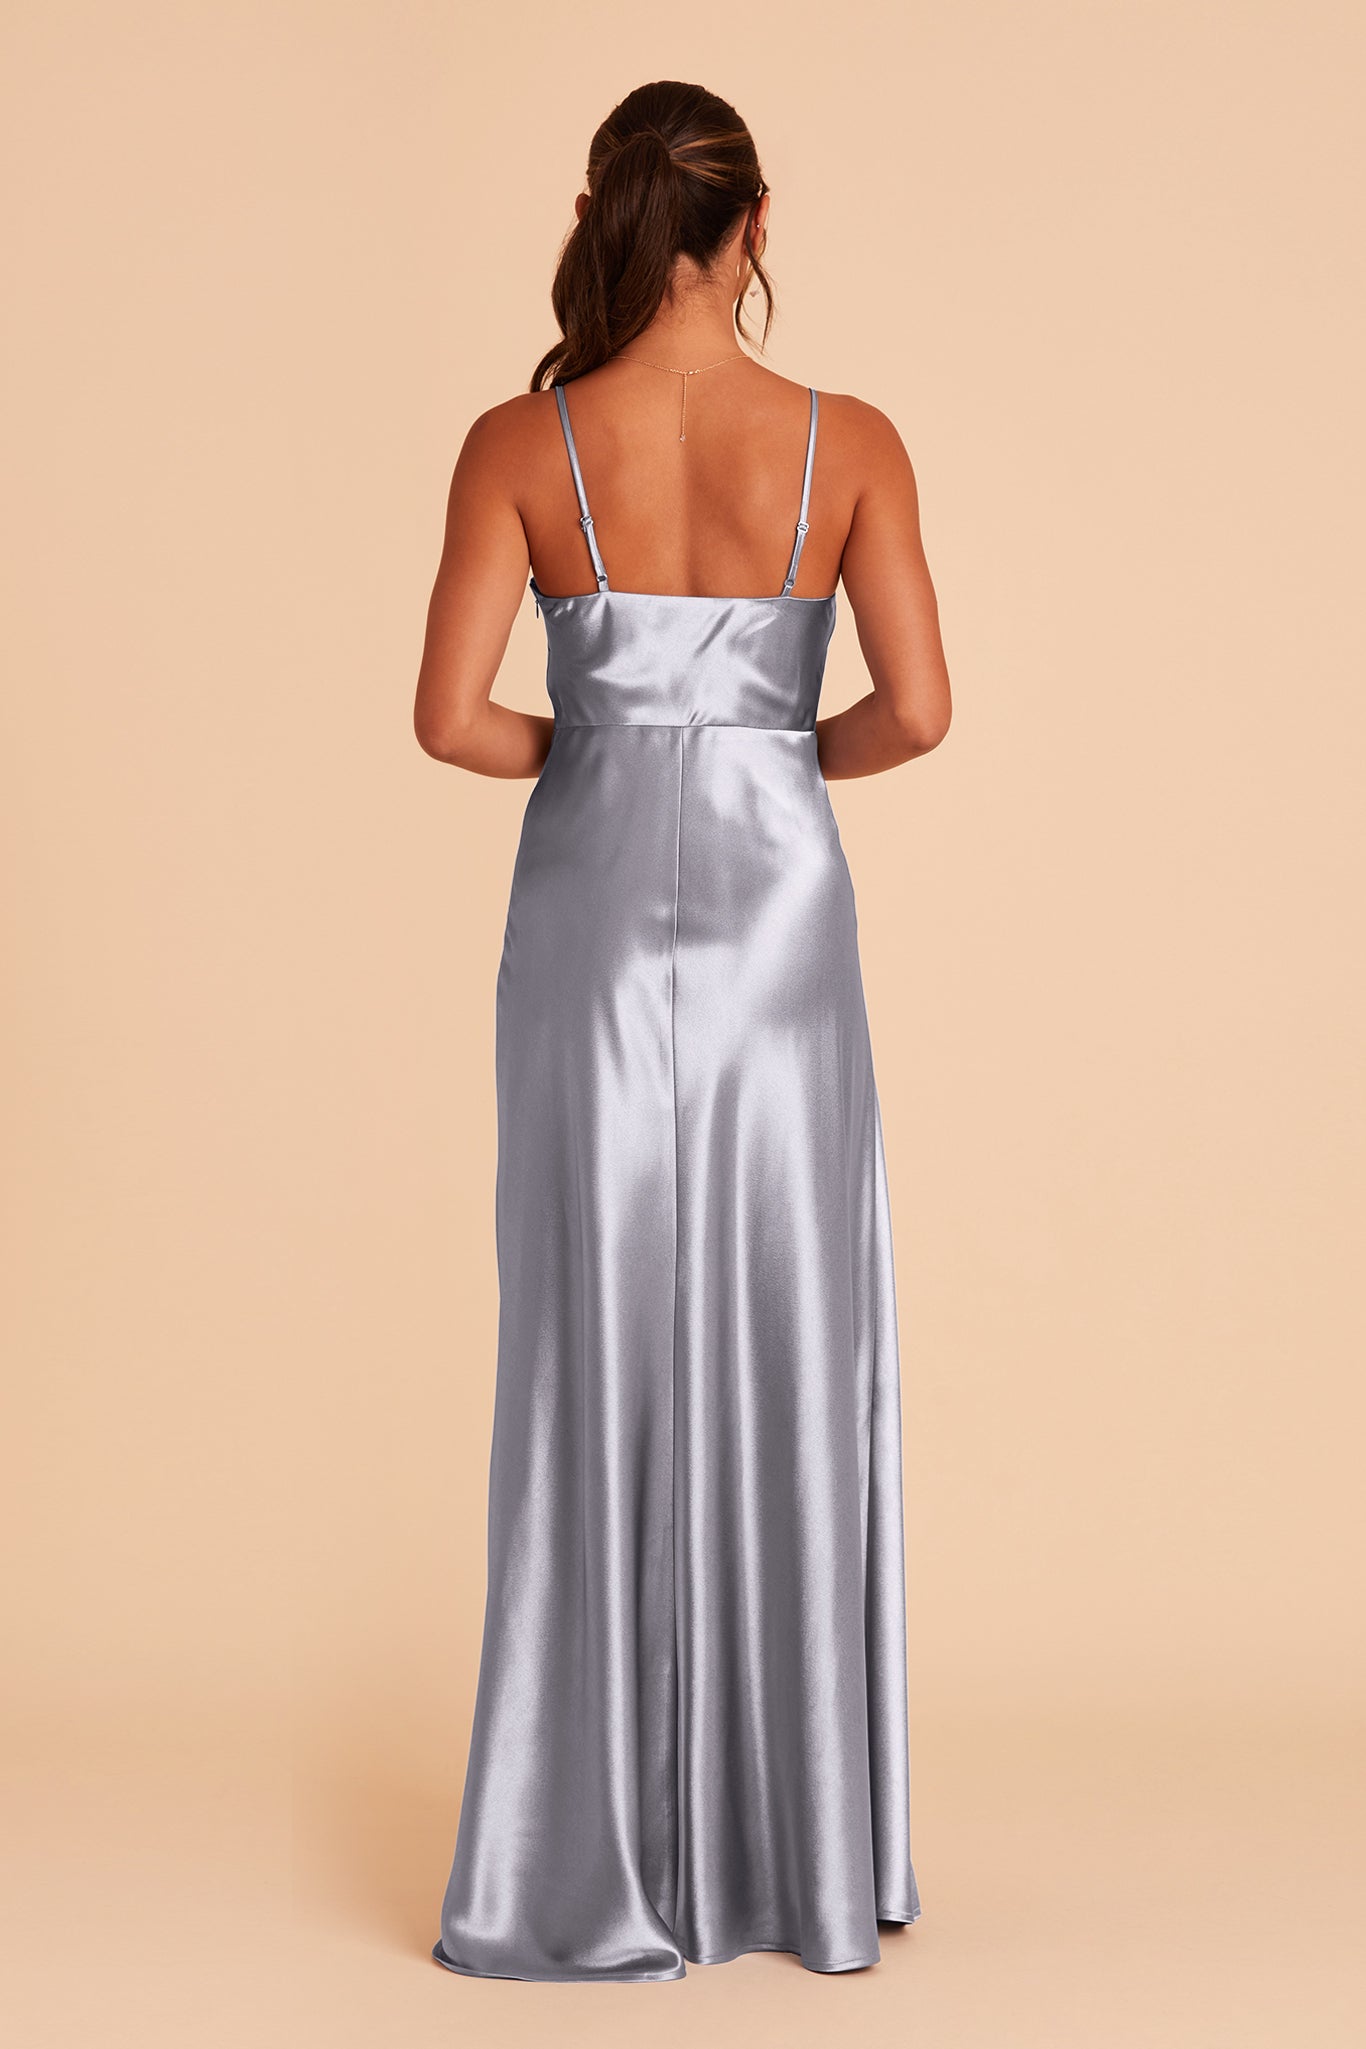 Lisa long bridesmaid dress with slit in Dusty Blue satin by Birdy Grey, back view